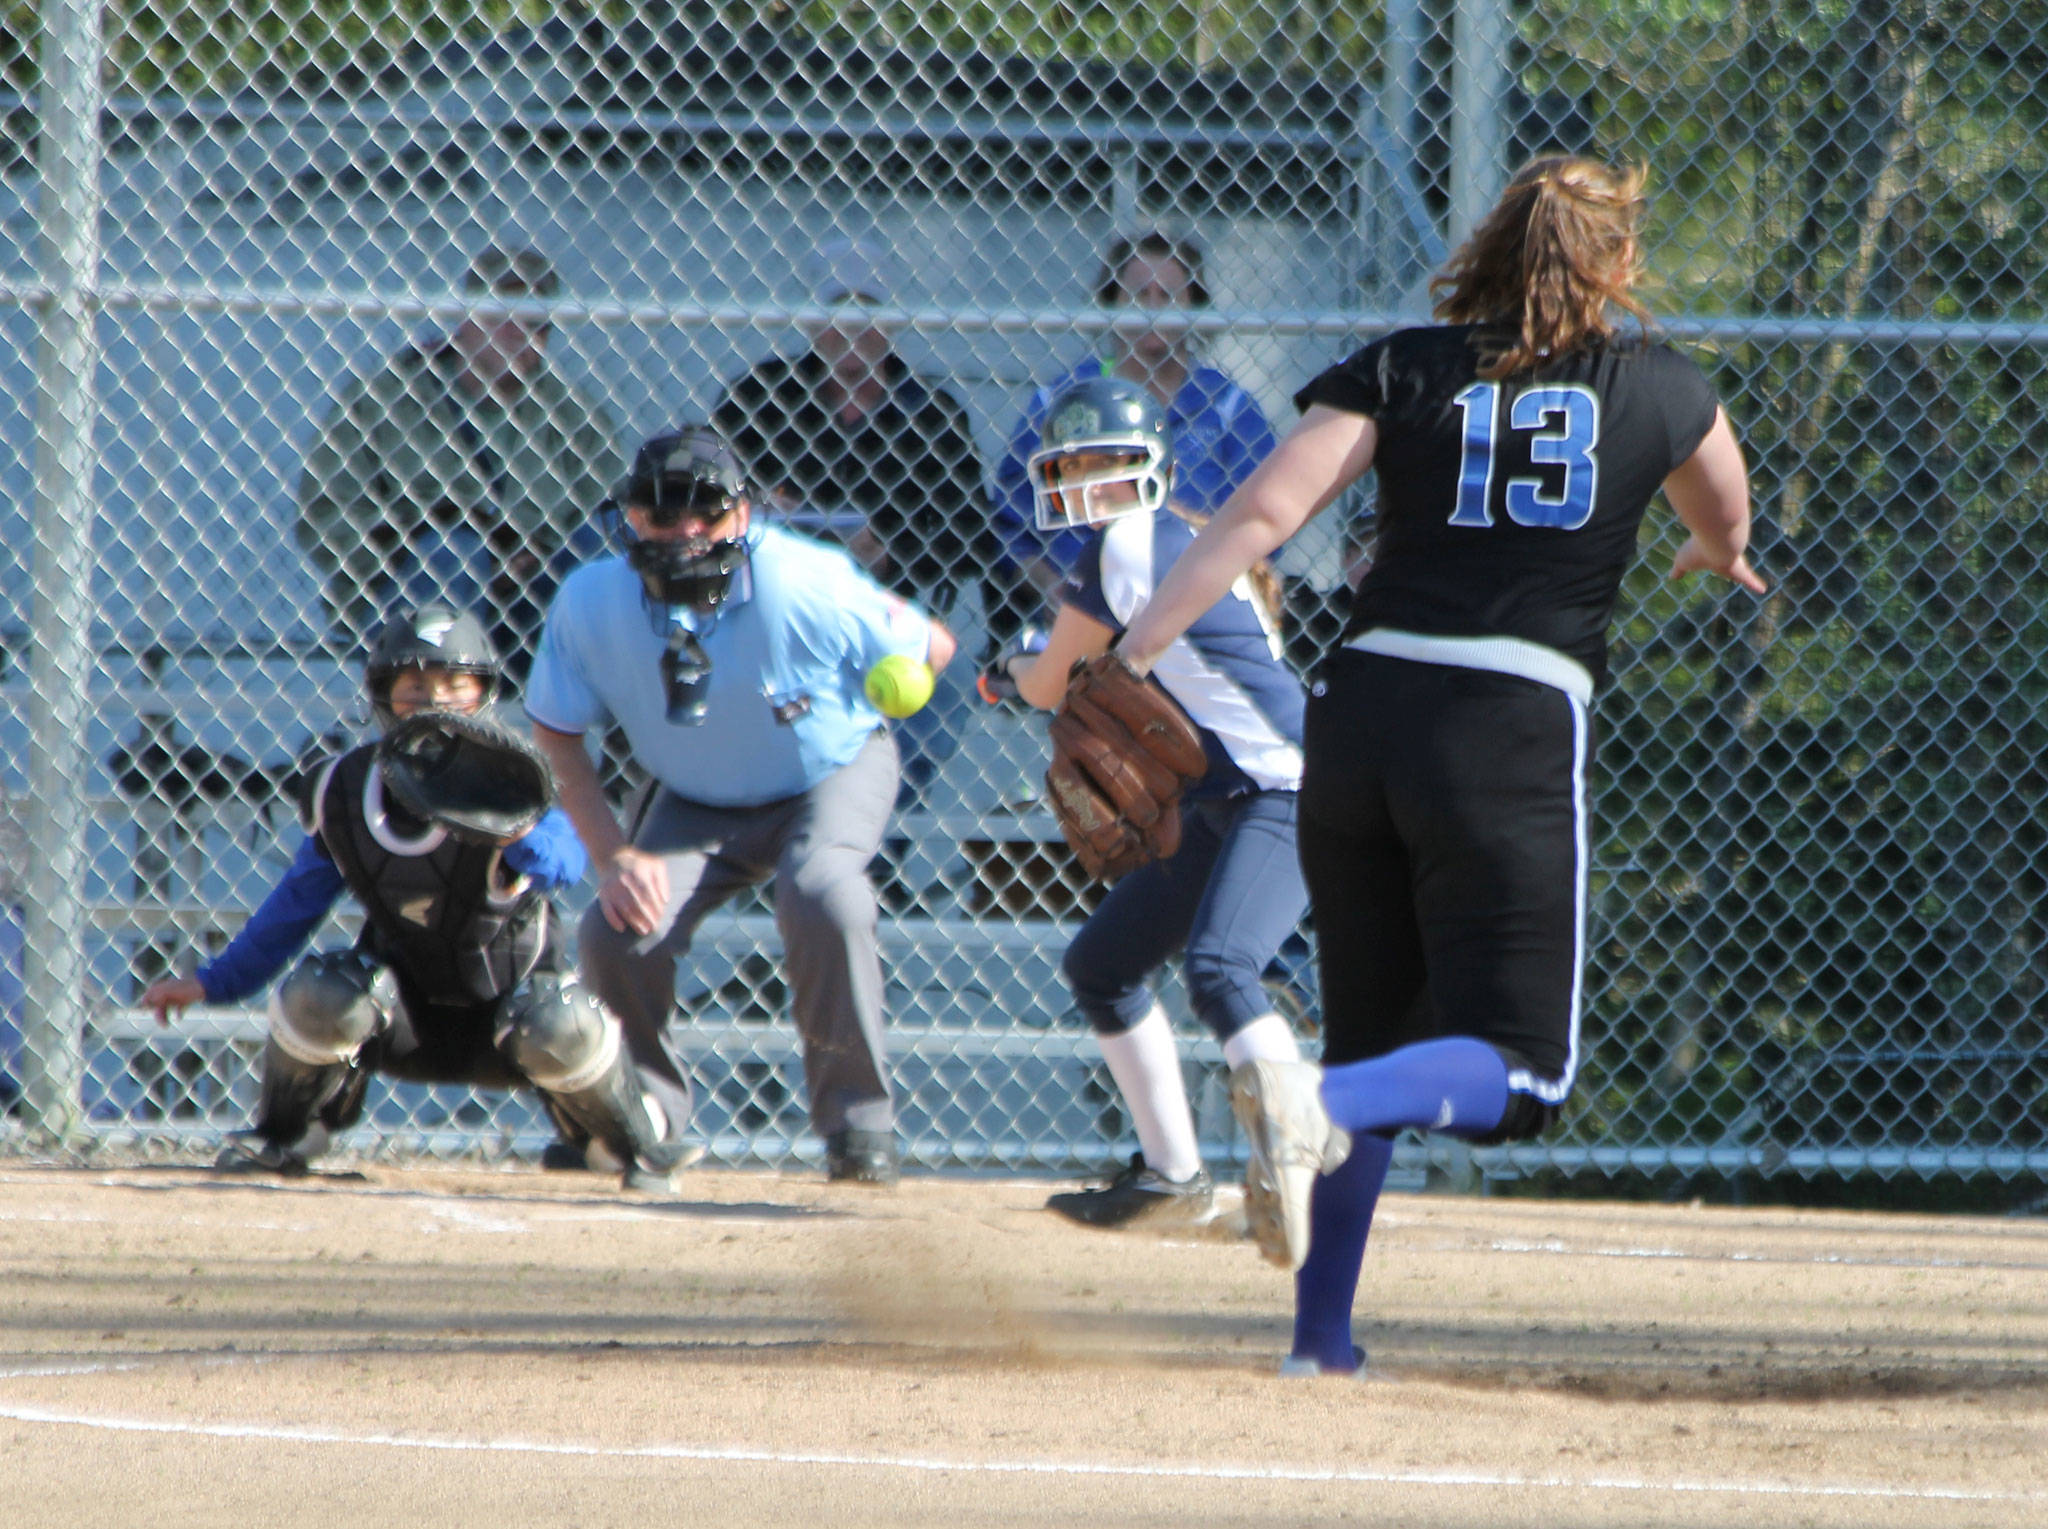 South Whidbey pitcher Mackenzee Collins tosses a strike to catcher Ari Marshall in the win over Cedar Park Christian Monday. Collins finished with a three-hitter and 16 strikeouts. (Photo by Jim Waller/Whidbey News Group)